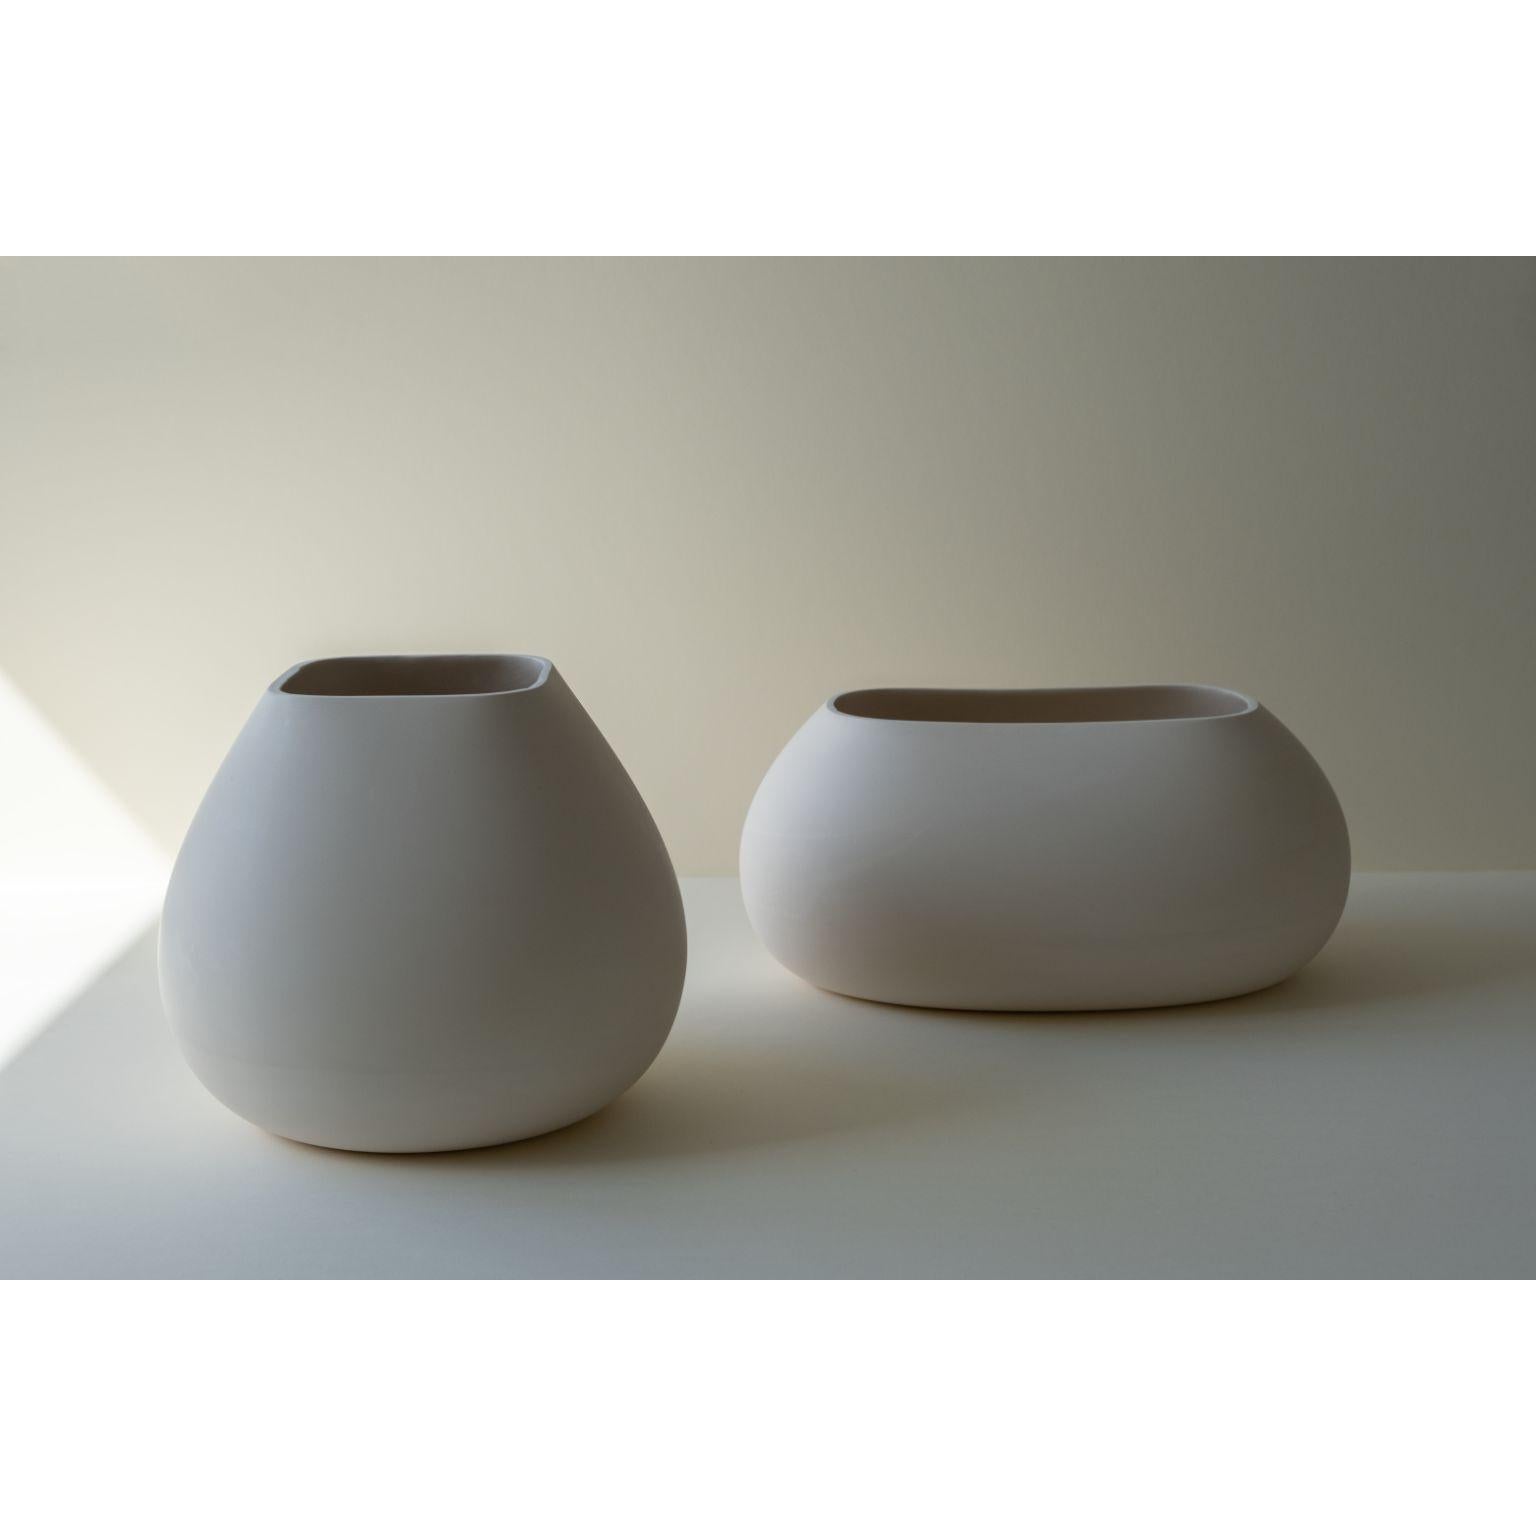 Set of 2 Flexible Formed Vases by Rino Claessens
Dimensions: Flexible Formed Vase 1: D 22 x W 22 x H 18.5 cm.
Flexible Formed Vase 2: D 21.5 x W 30 x H 14 cm.
Materials: Glazed ceramic.
Finish: Gloss glazed inside, polished outer surface.
Total